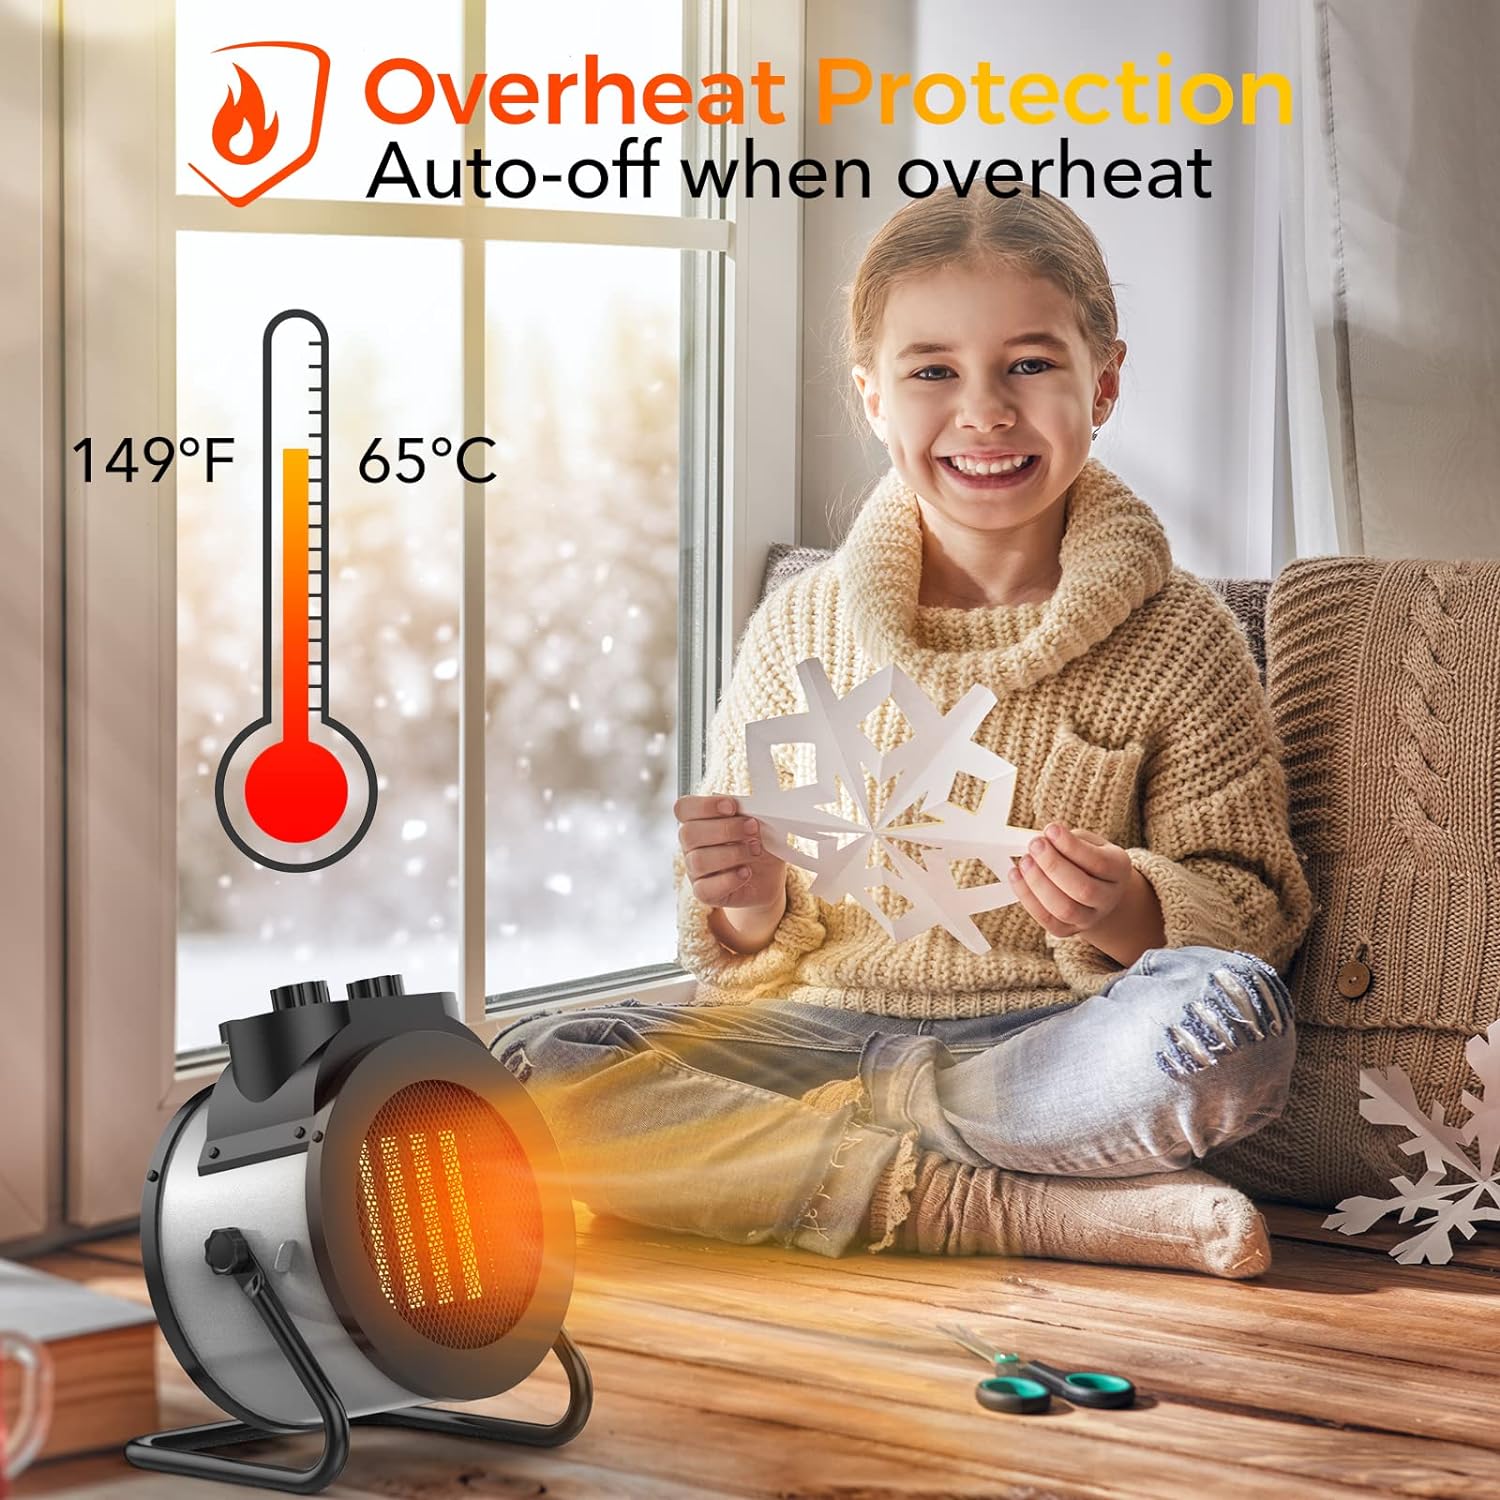 Elevoke Space Heaters for Indoor Use, 1500W PTC Electric Heater with 90°Adjustable Angle, Fast Safety Heat, Small Portable Heater for Office Home(Yellow) - Elevoke Space Heaters Review